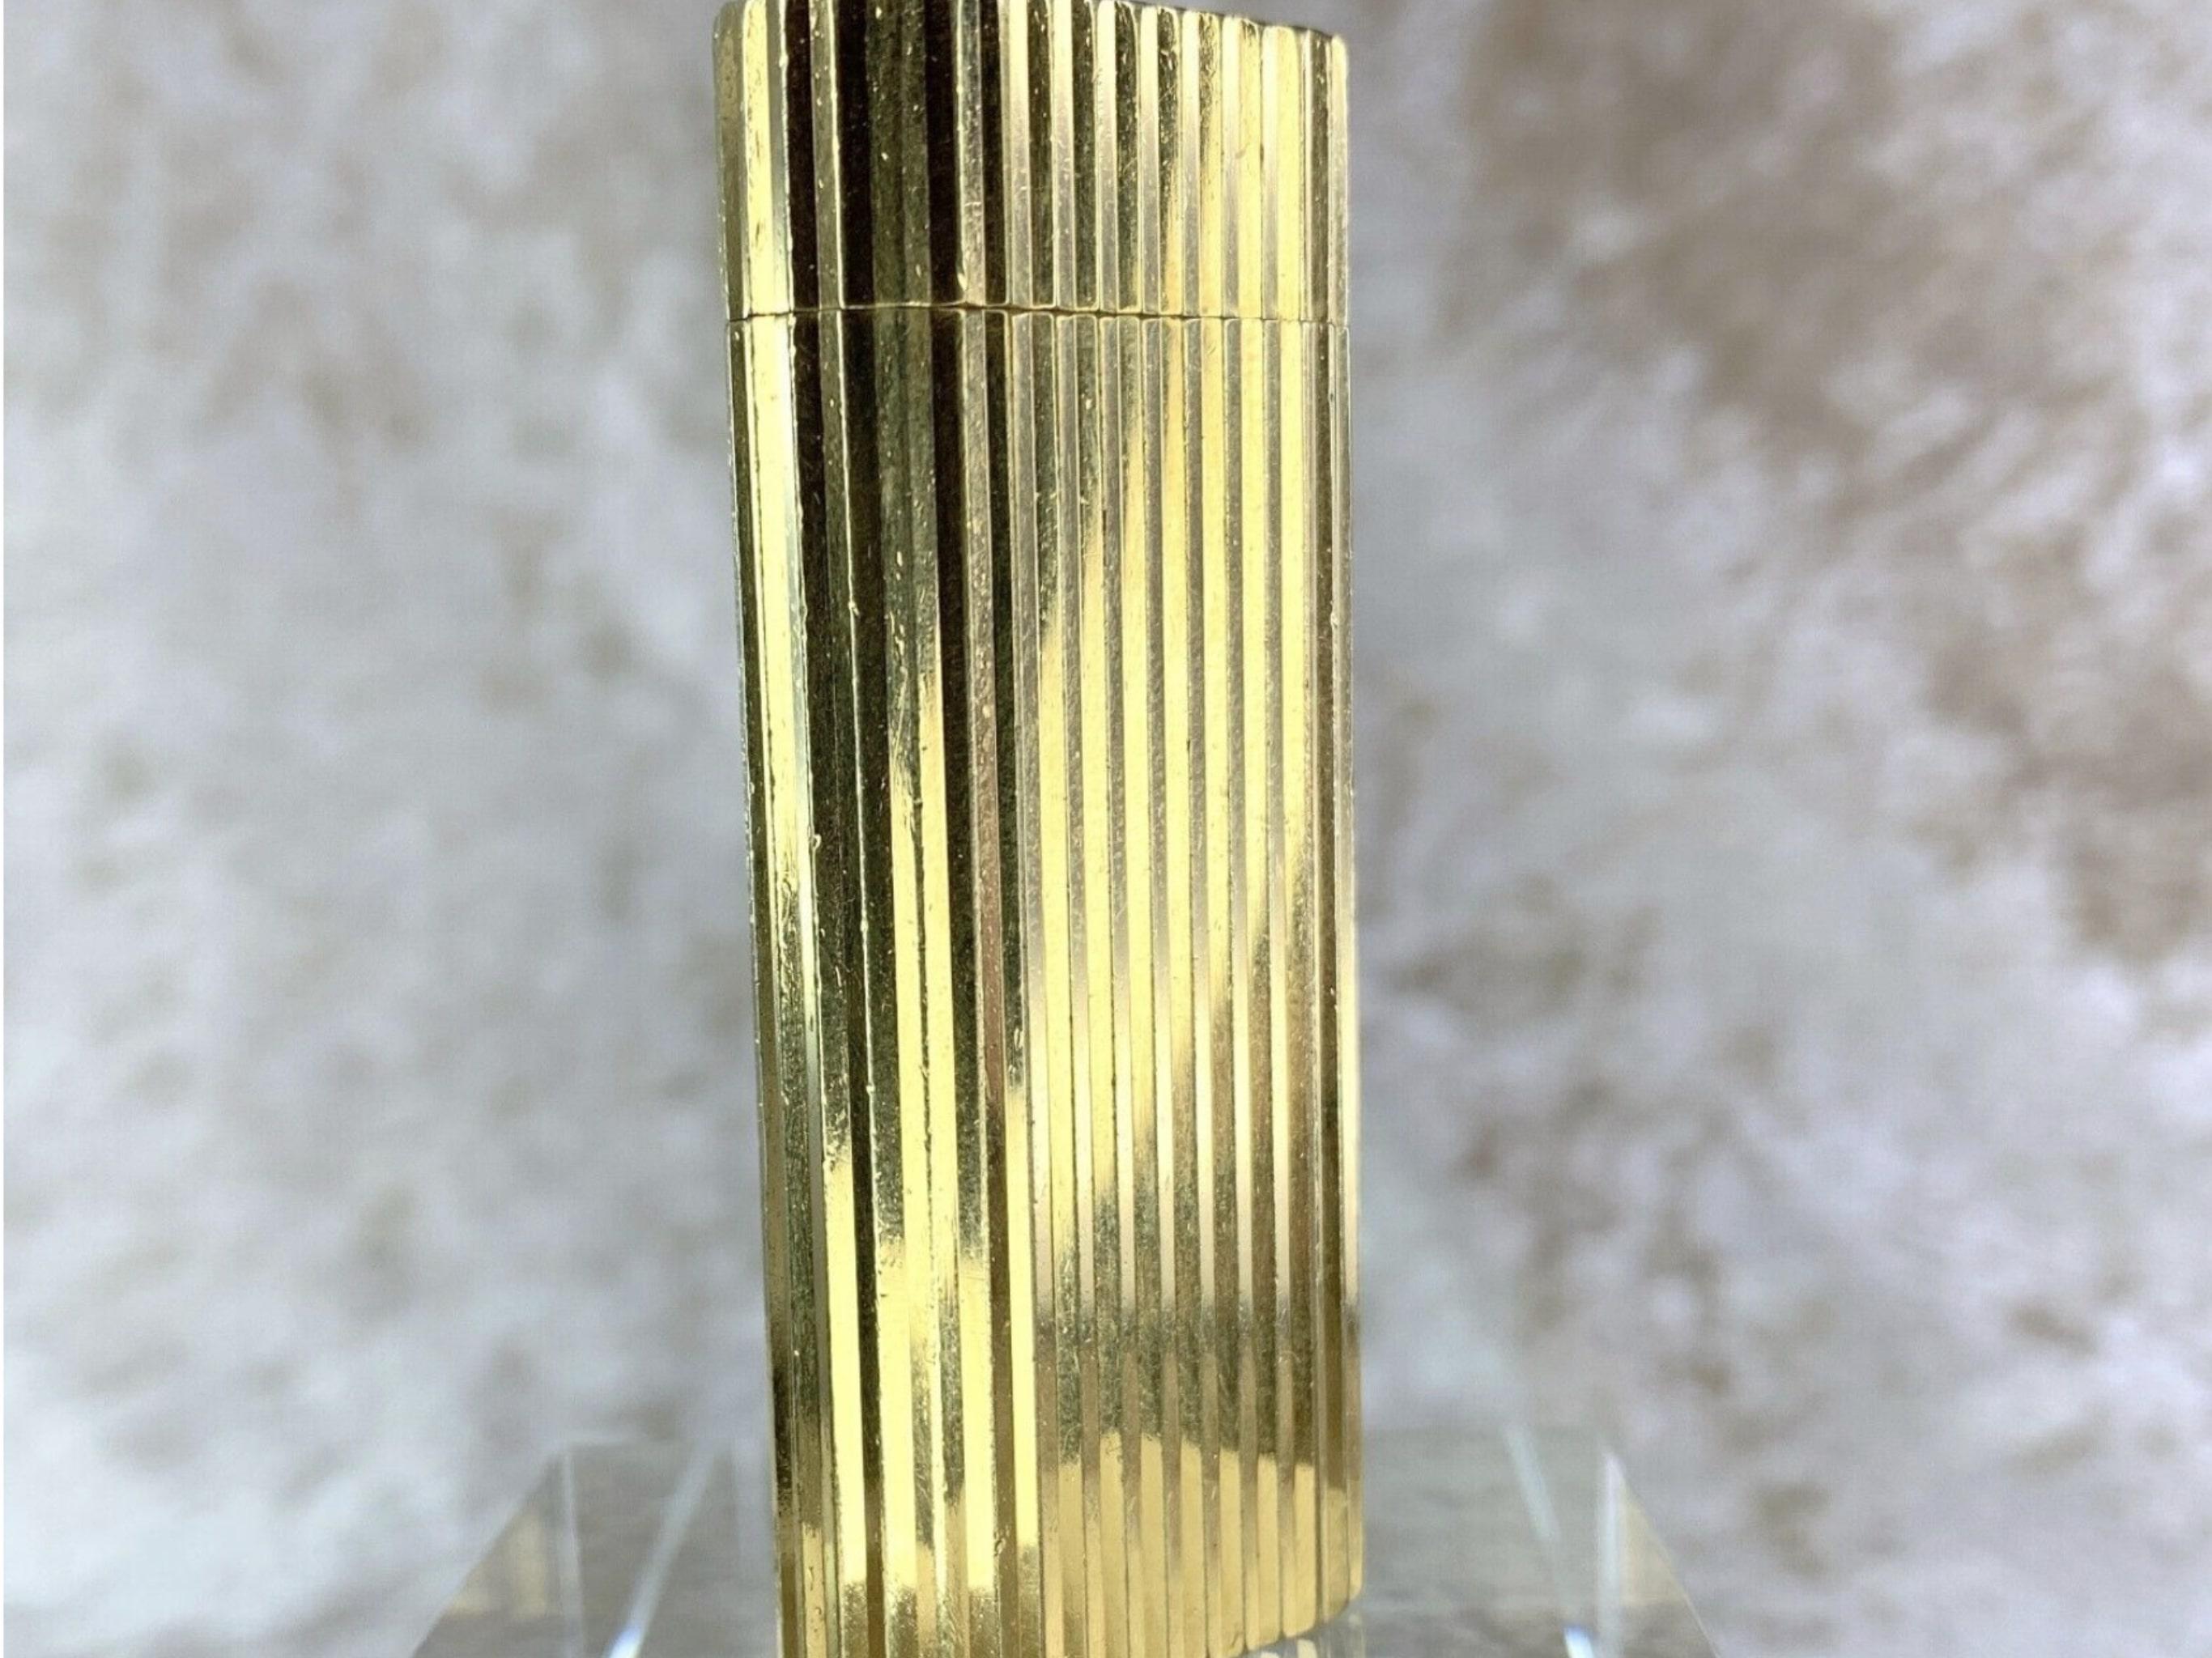 Cartier Vintage 
Gordon Cartier Lighter Short Oval 
18K Gold Plated
Rare 
Original Cartier Case and Certificate
18K Gold Plated Finish
Circa 2000
Was overhauled in 2022 at Cartier. 
In fantastic condition 